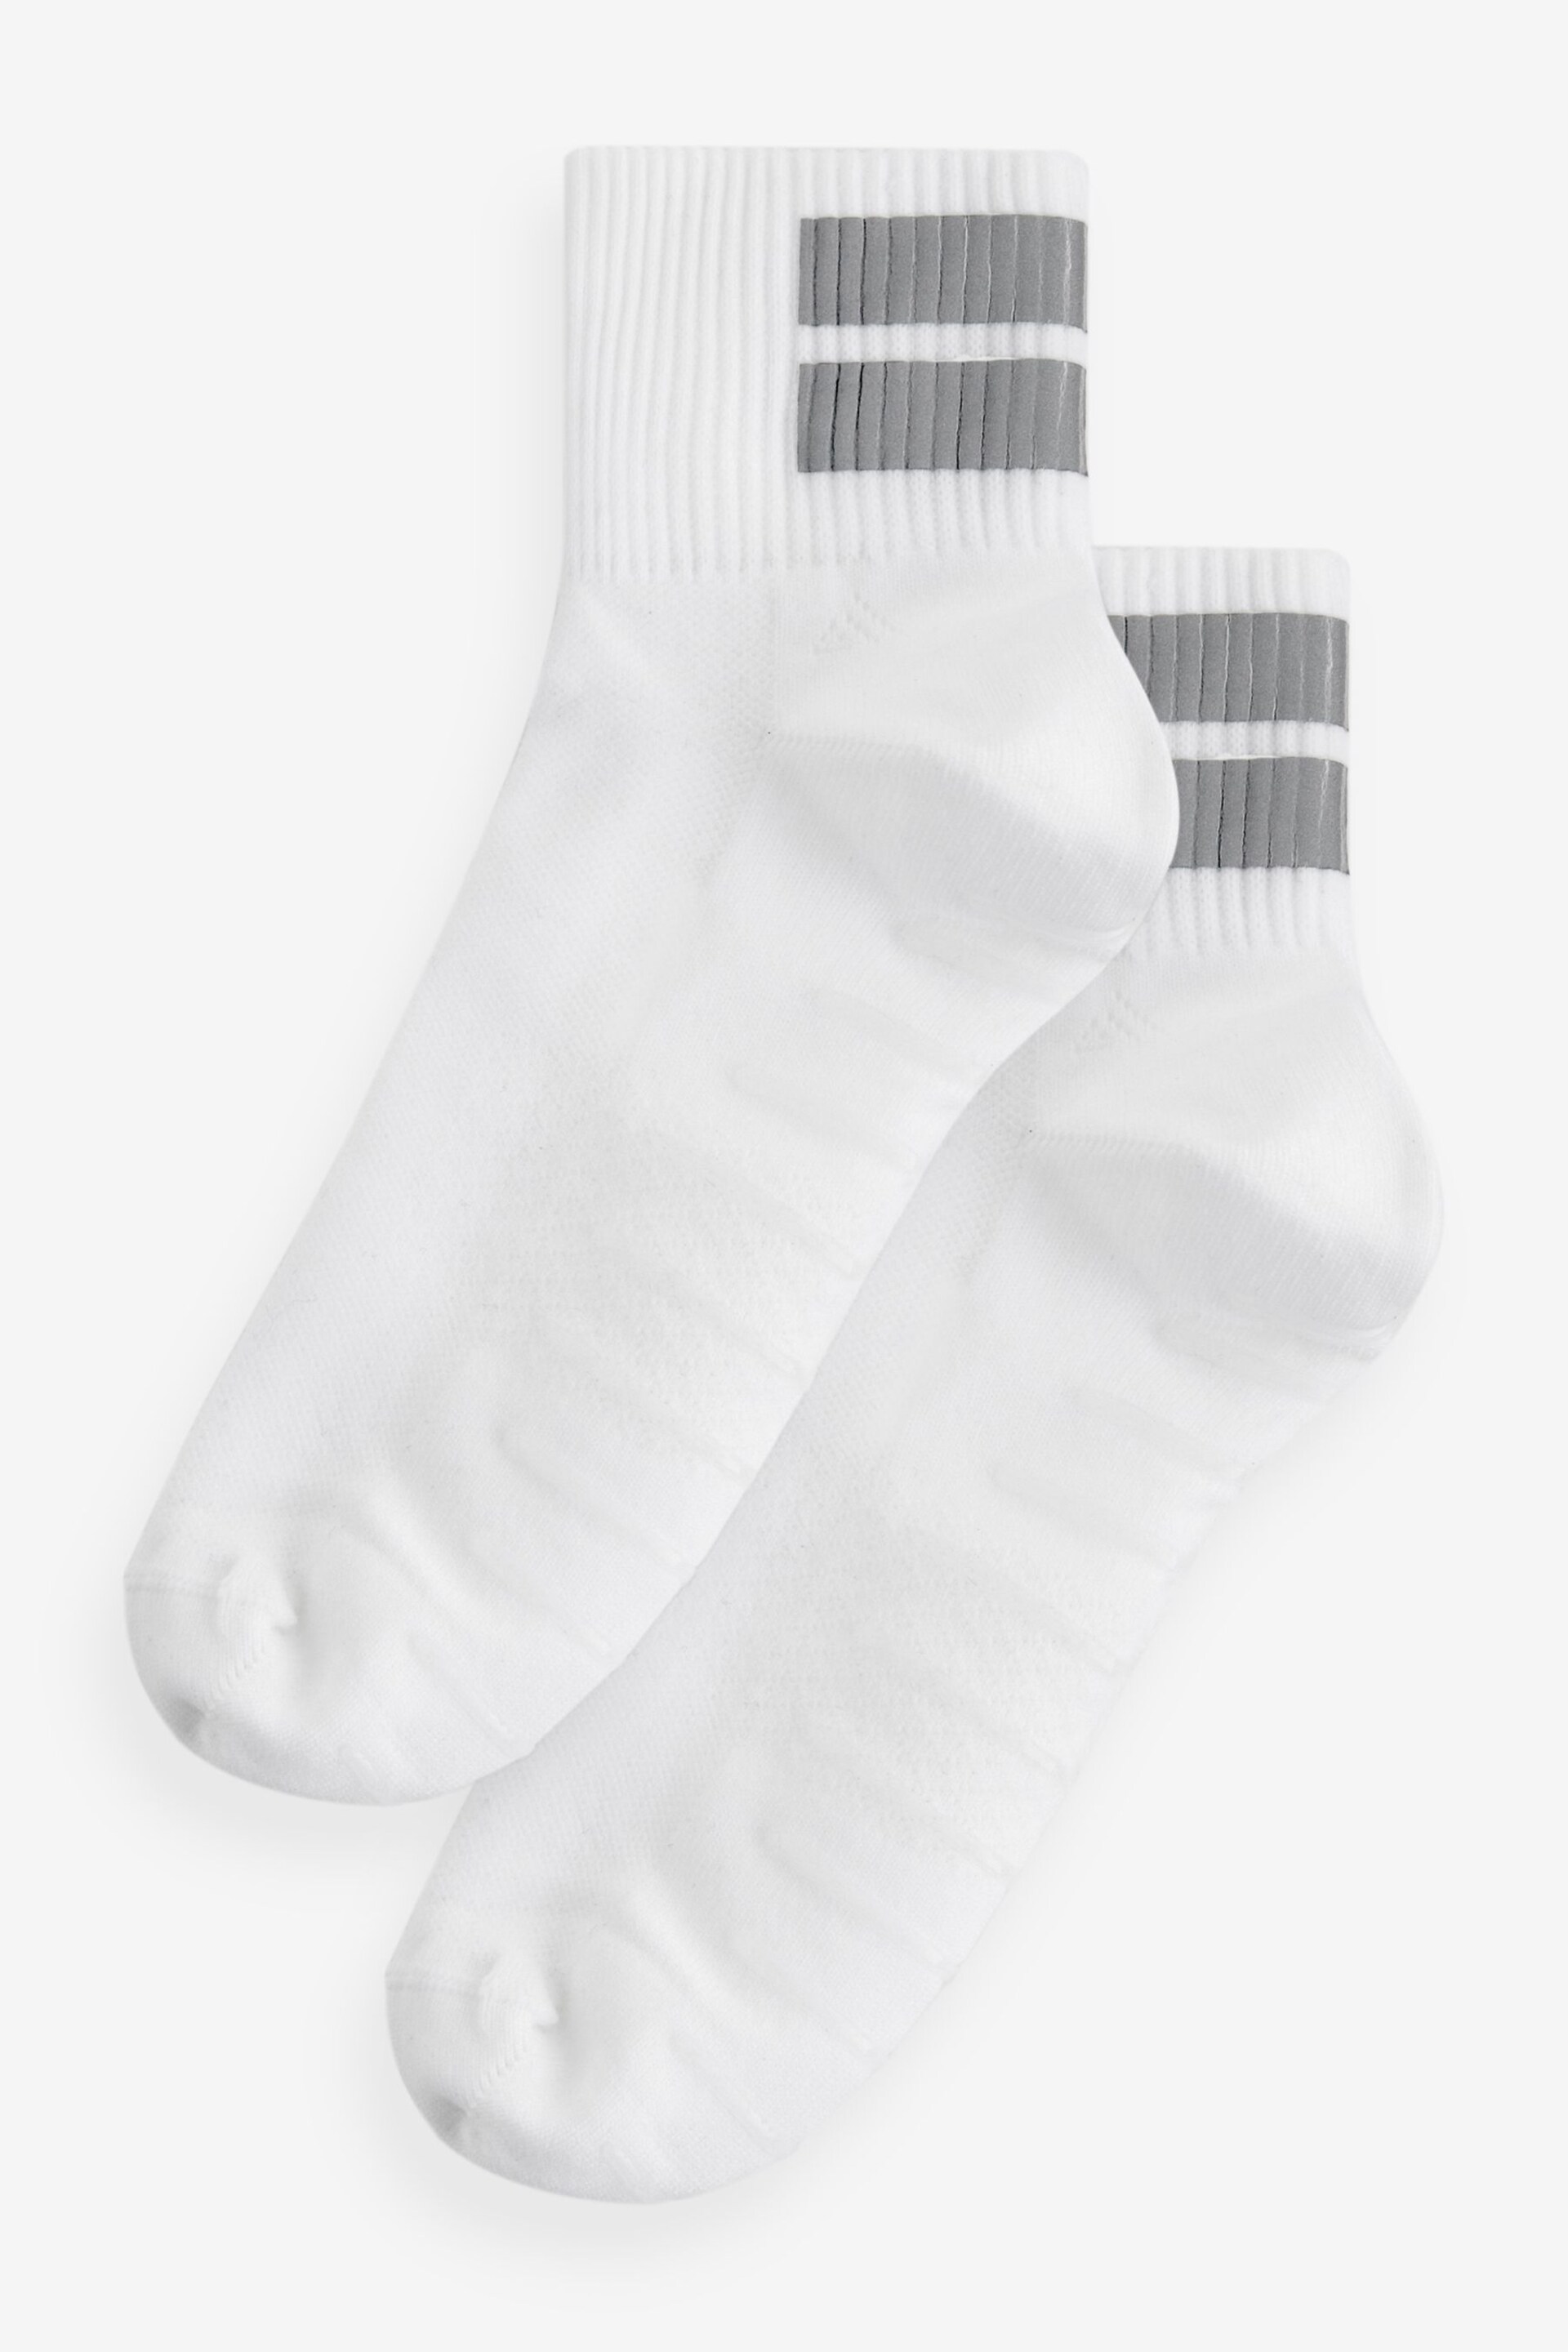 White Running Gripper Ankle Socks 2 Pack with Reflective Strip - Image 1 of 4